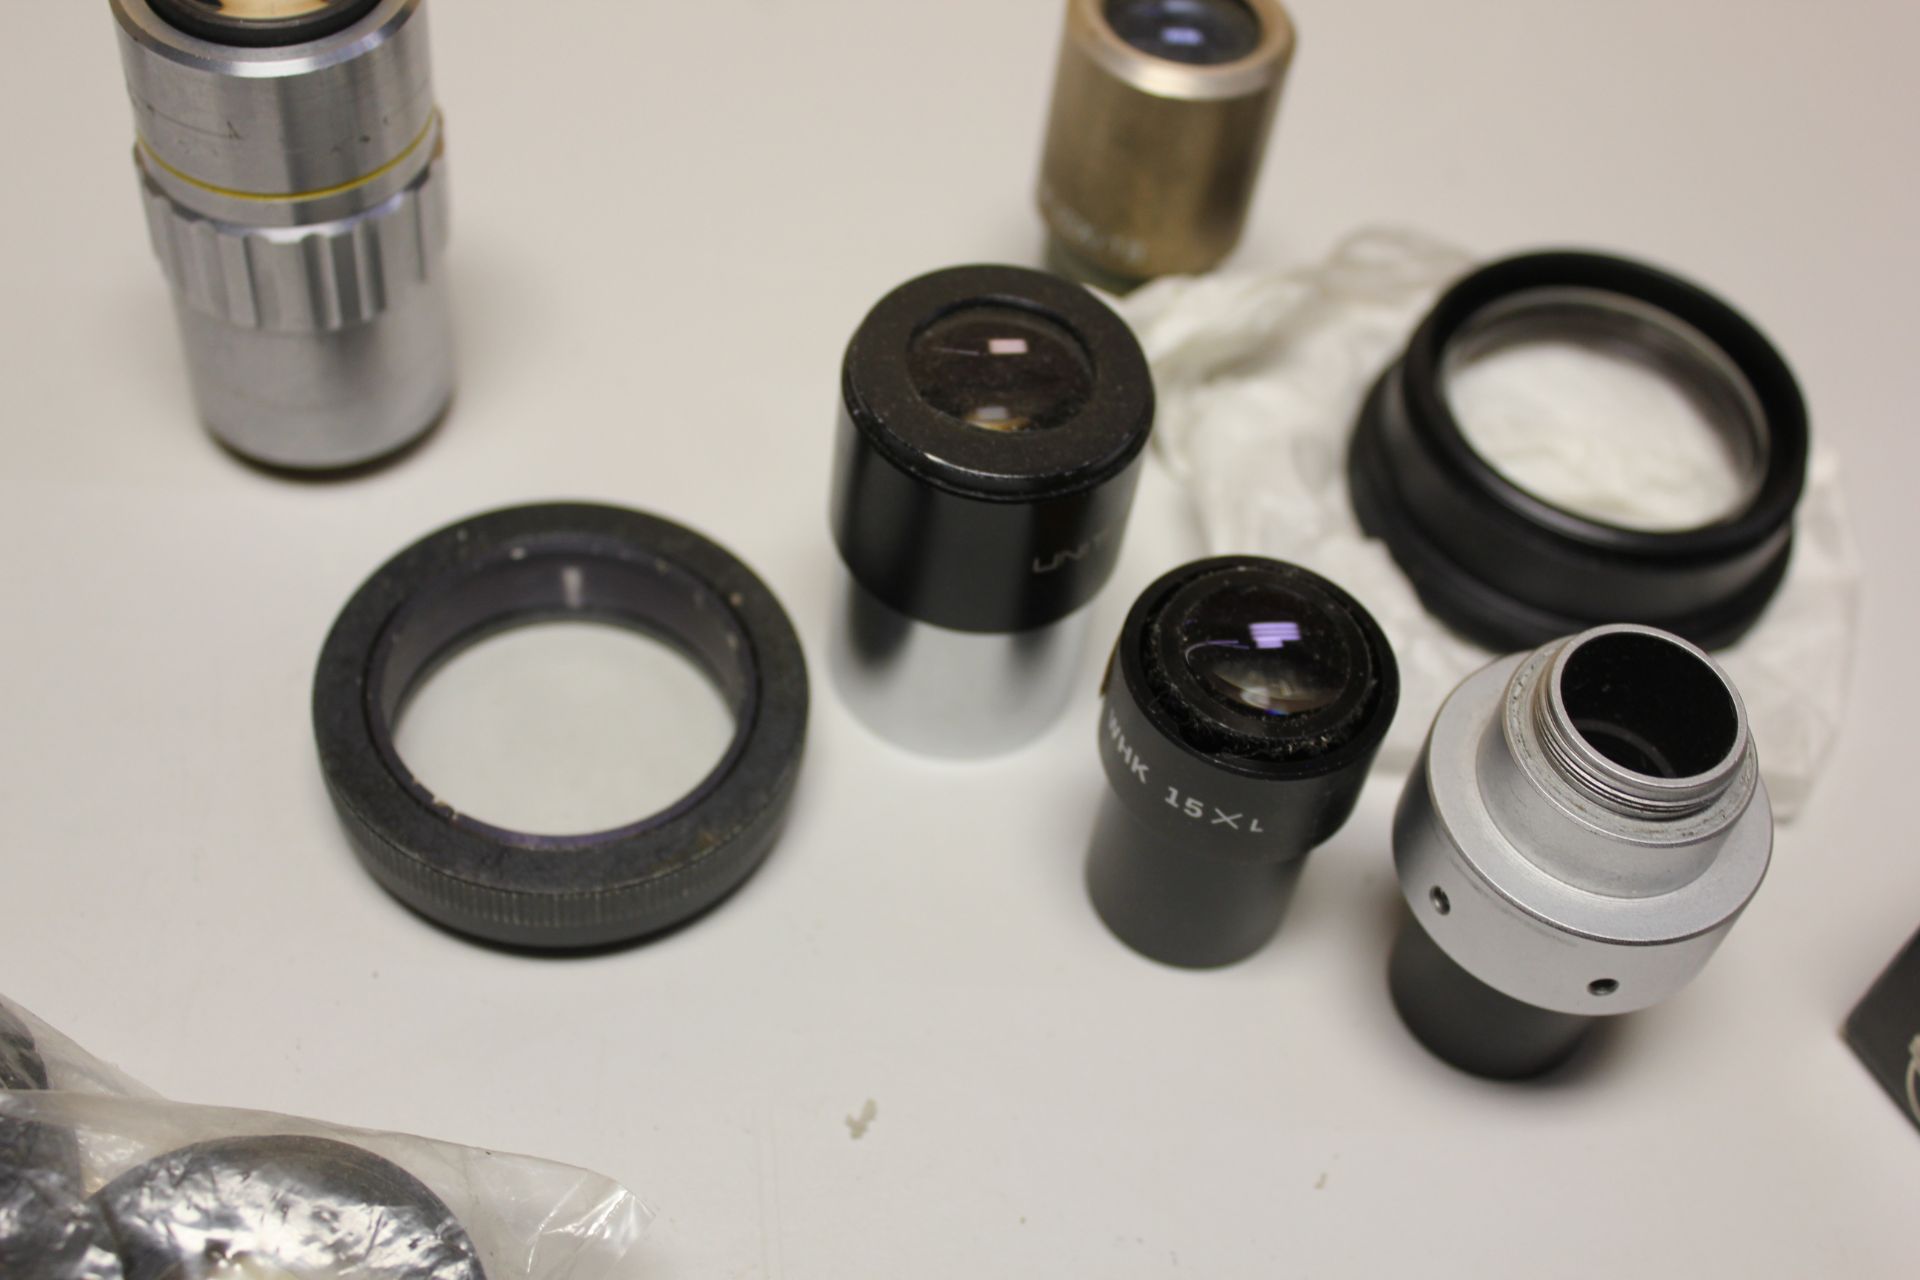 LOT OF MICROSCOPE PARTS - OBJECTIVES,EYE PIECES, ETC - Image 13 of 15